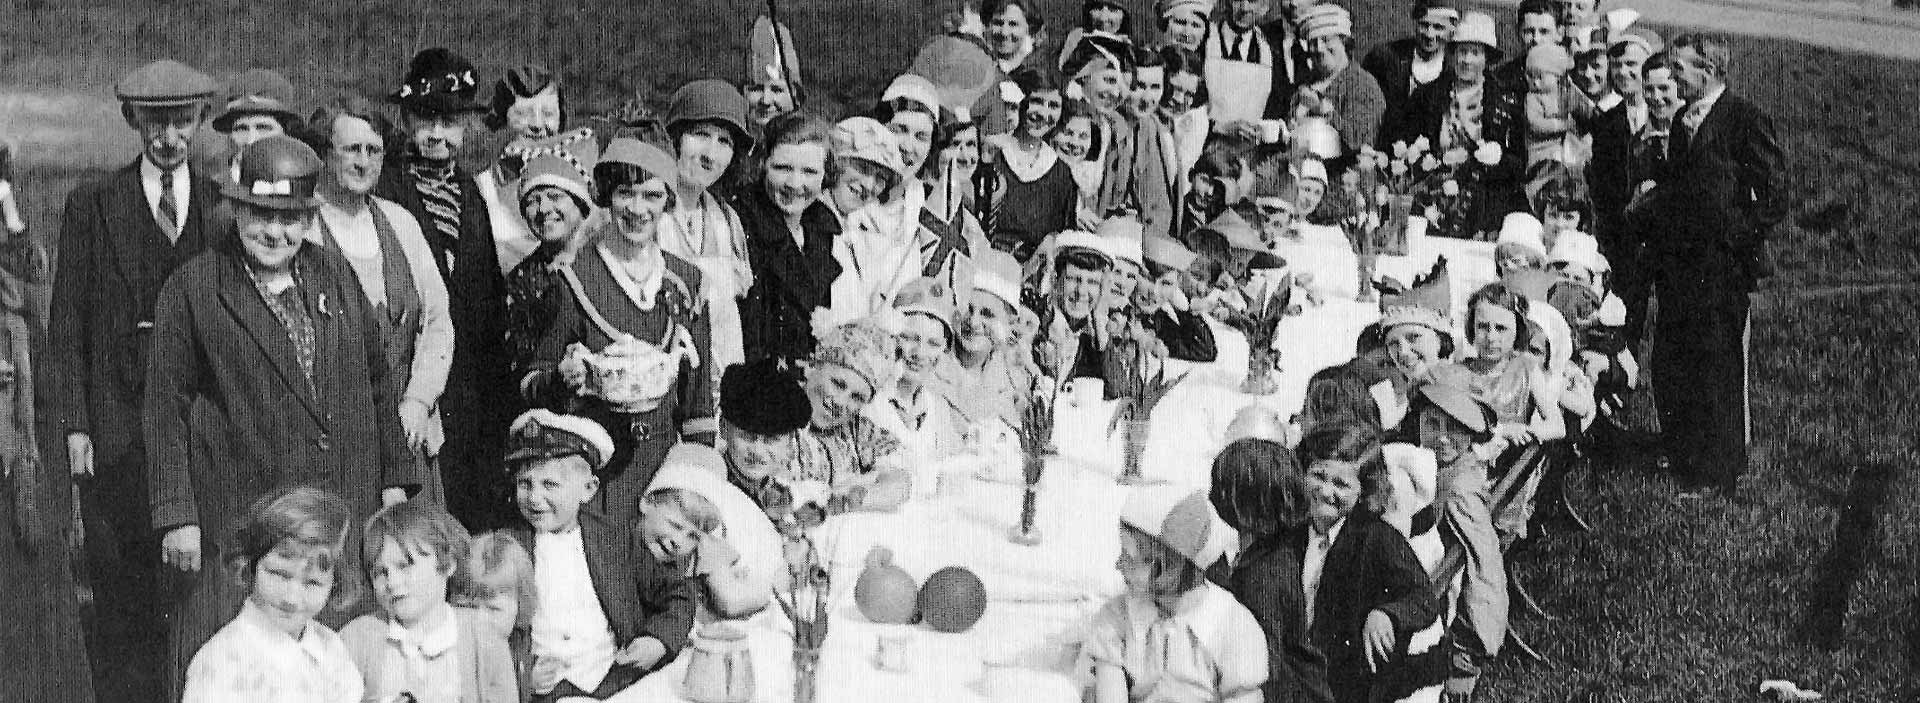 image of Walbottle Village celebrations for the Silver Jubilee of King George V and Queen Mary in 1935